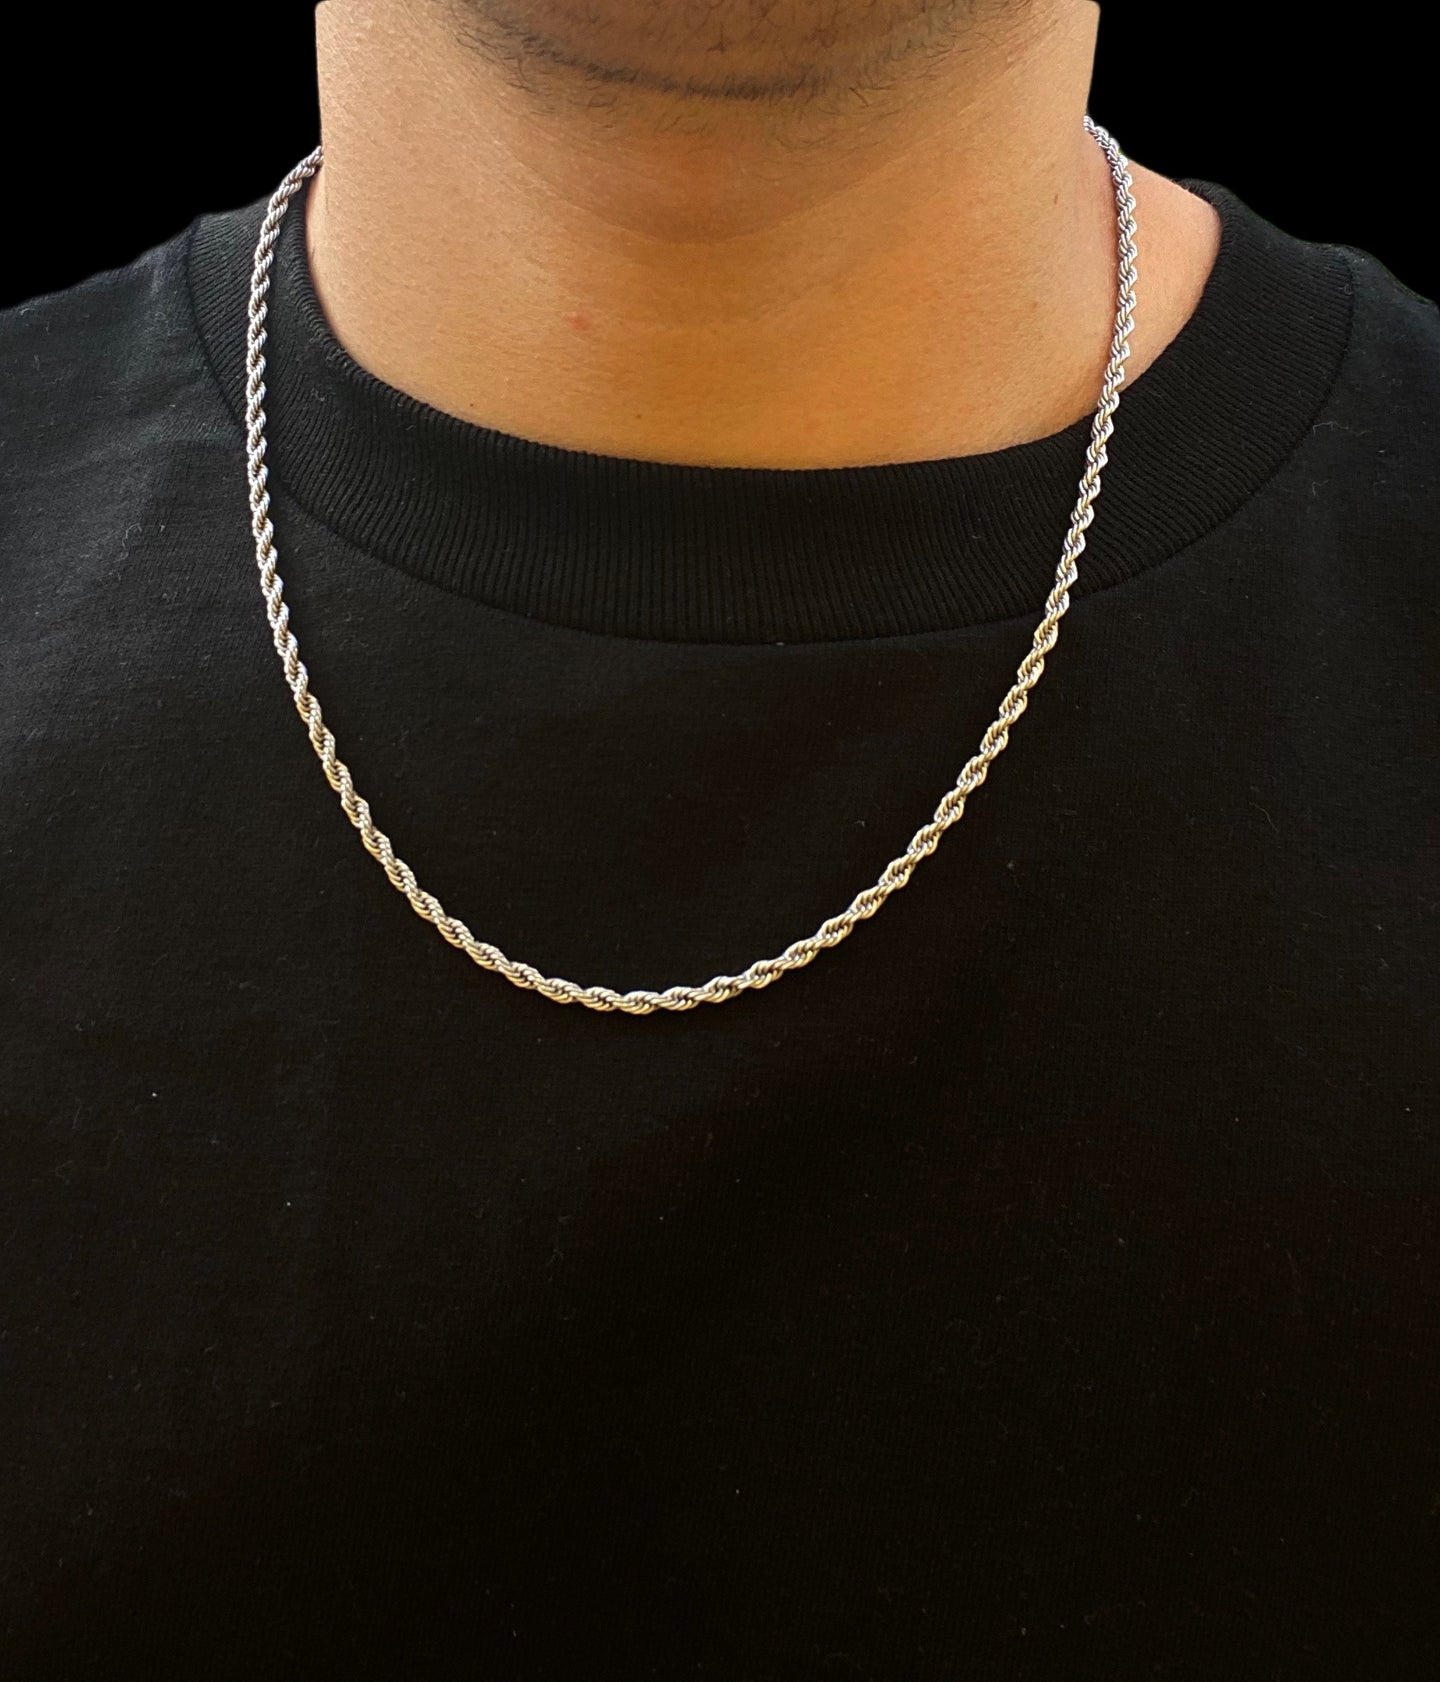 Silver Rope Chain - Fashion Jewelry by Yordy.